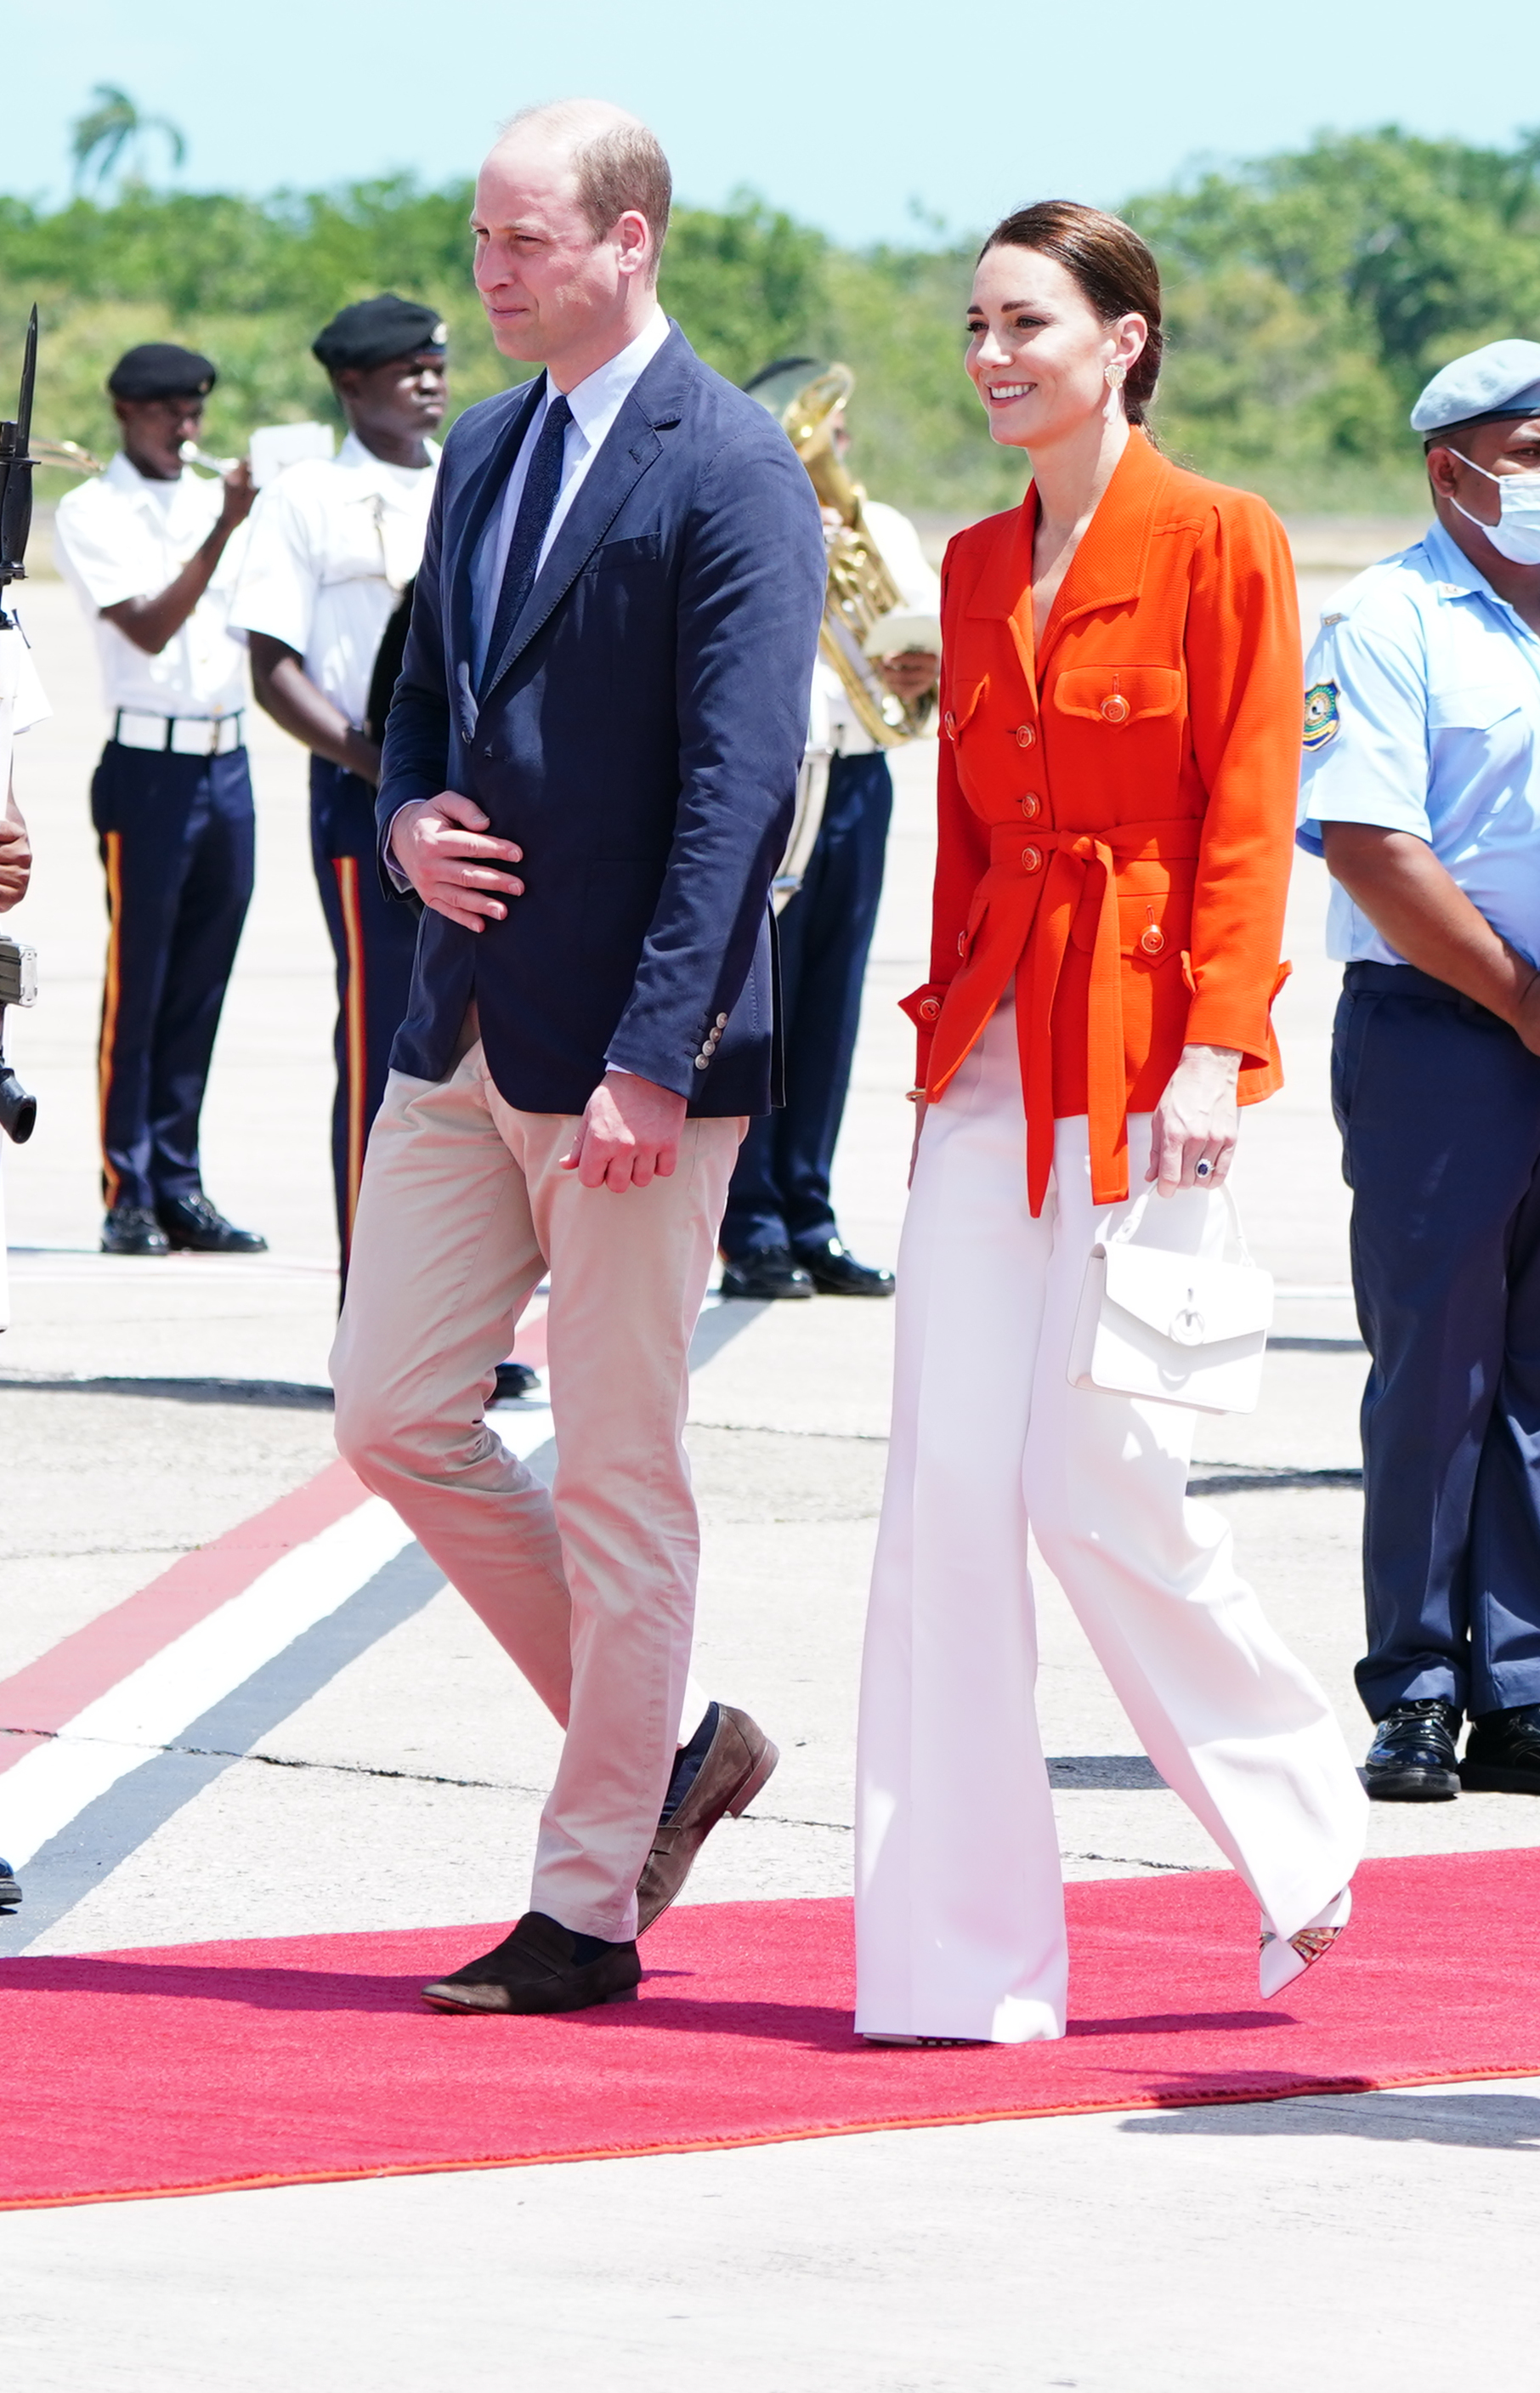 The Duke and Duchess of Cambridge board a plane as they depart from Philip S. W Goldson International Airport, Belize